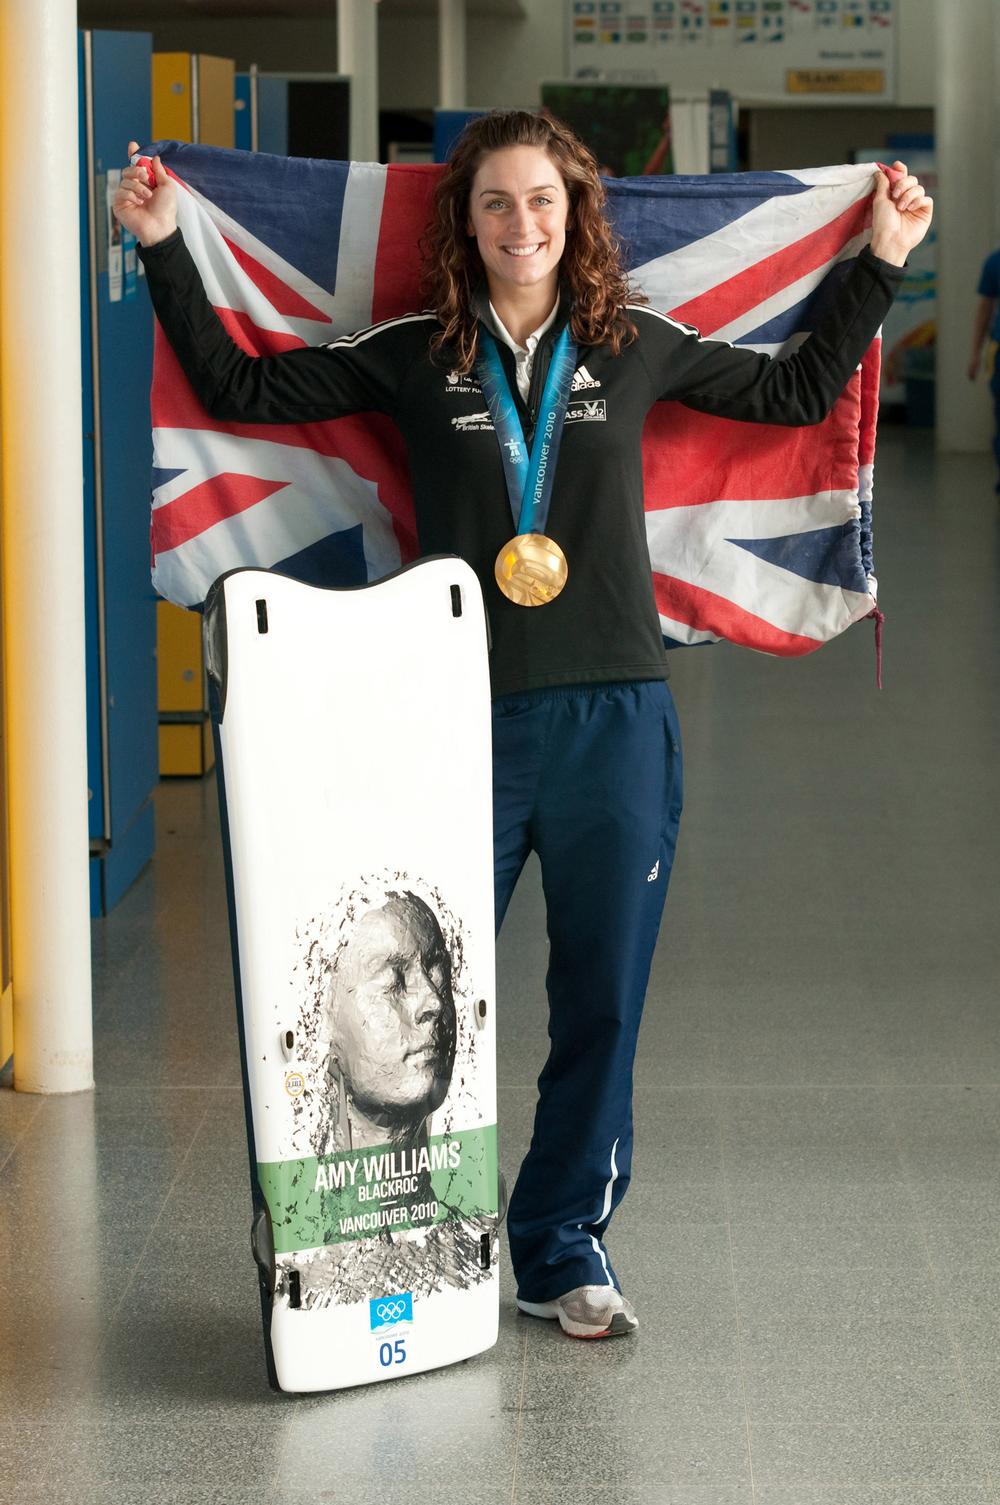 Amy Williams with ‘Arthur the sled’ – a gold medal winning team at Vancouver 2010